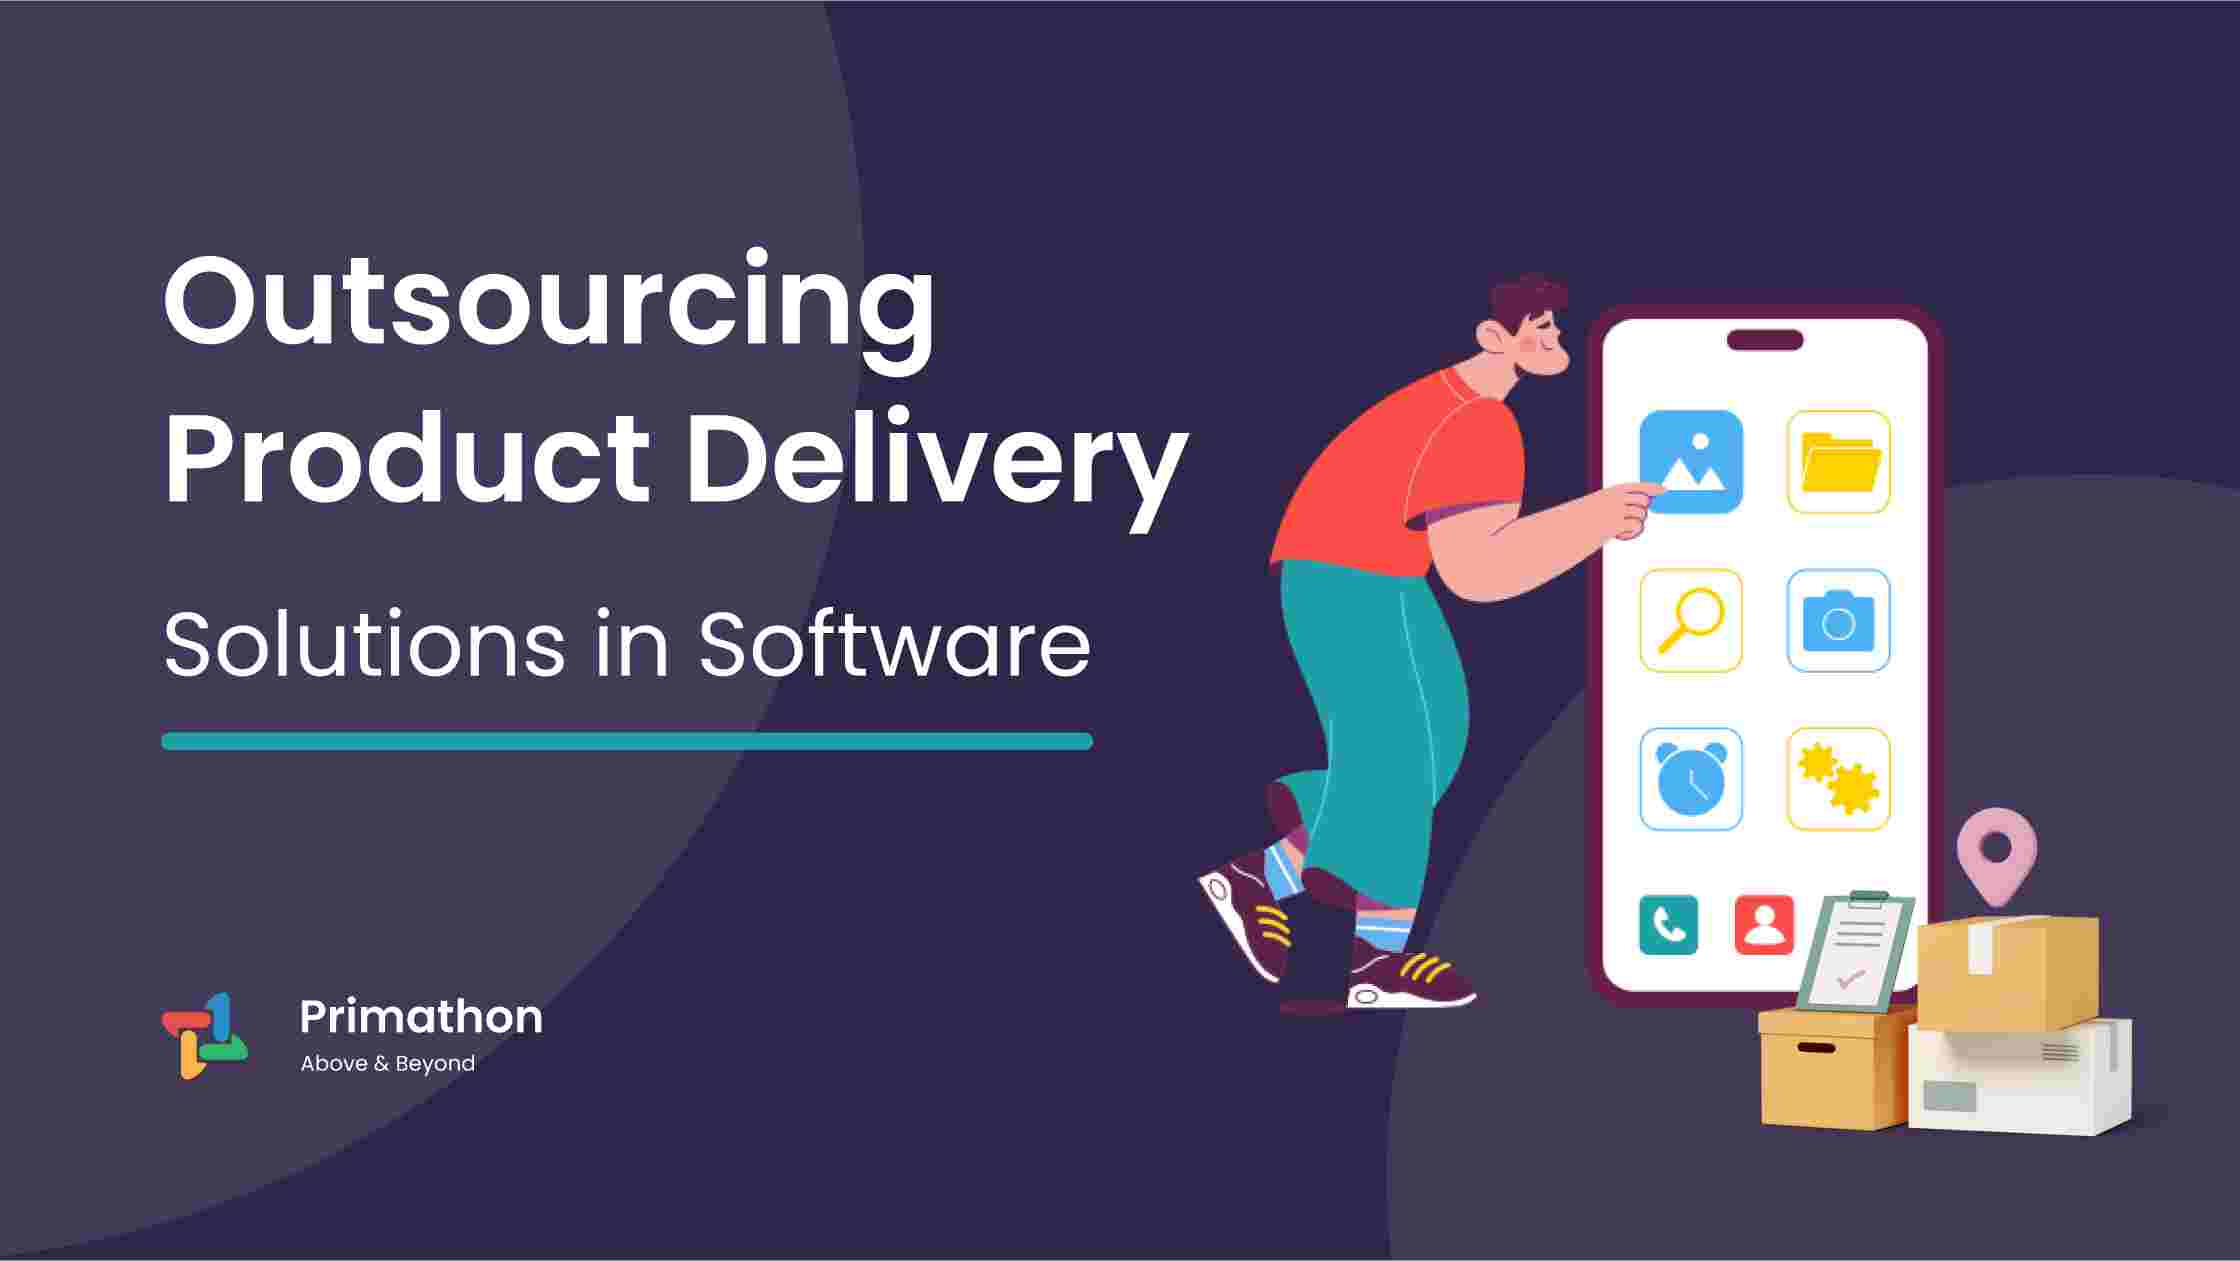 Outsourcing product delivery solutions in software